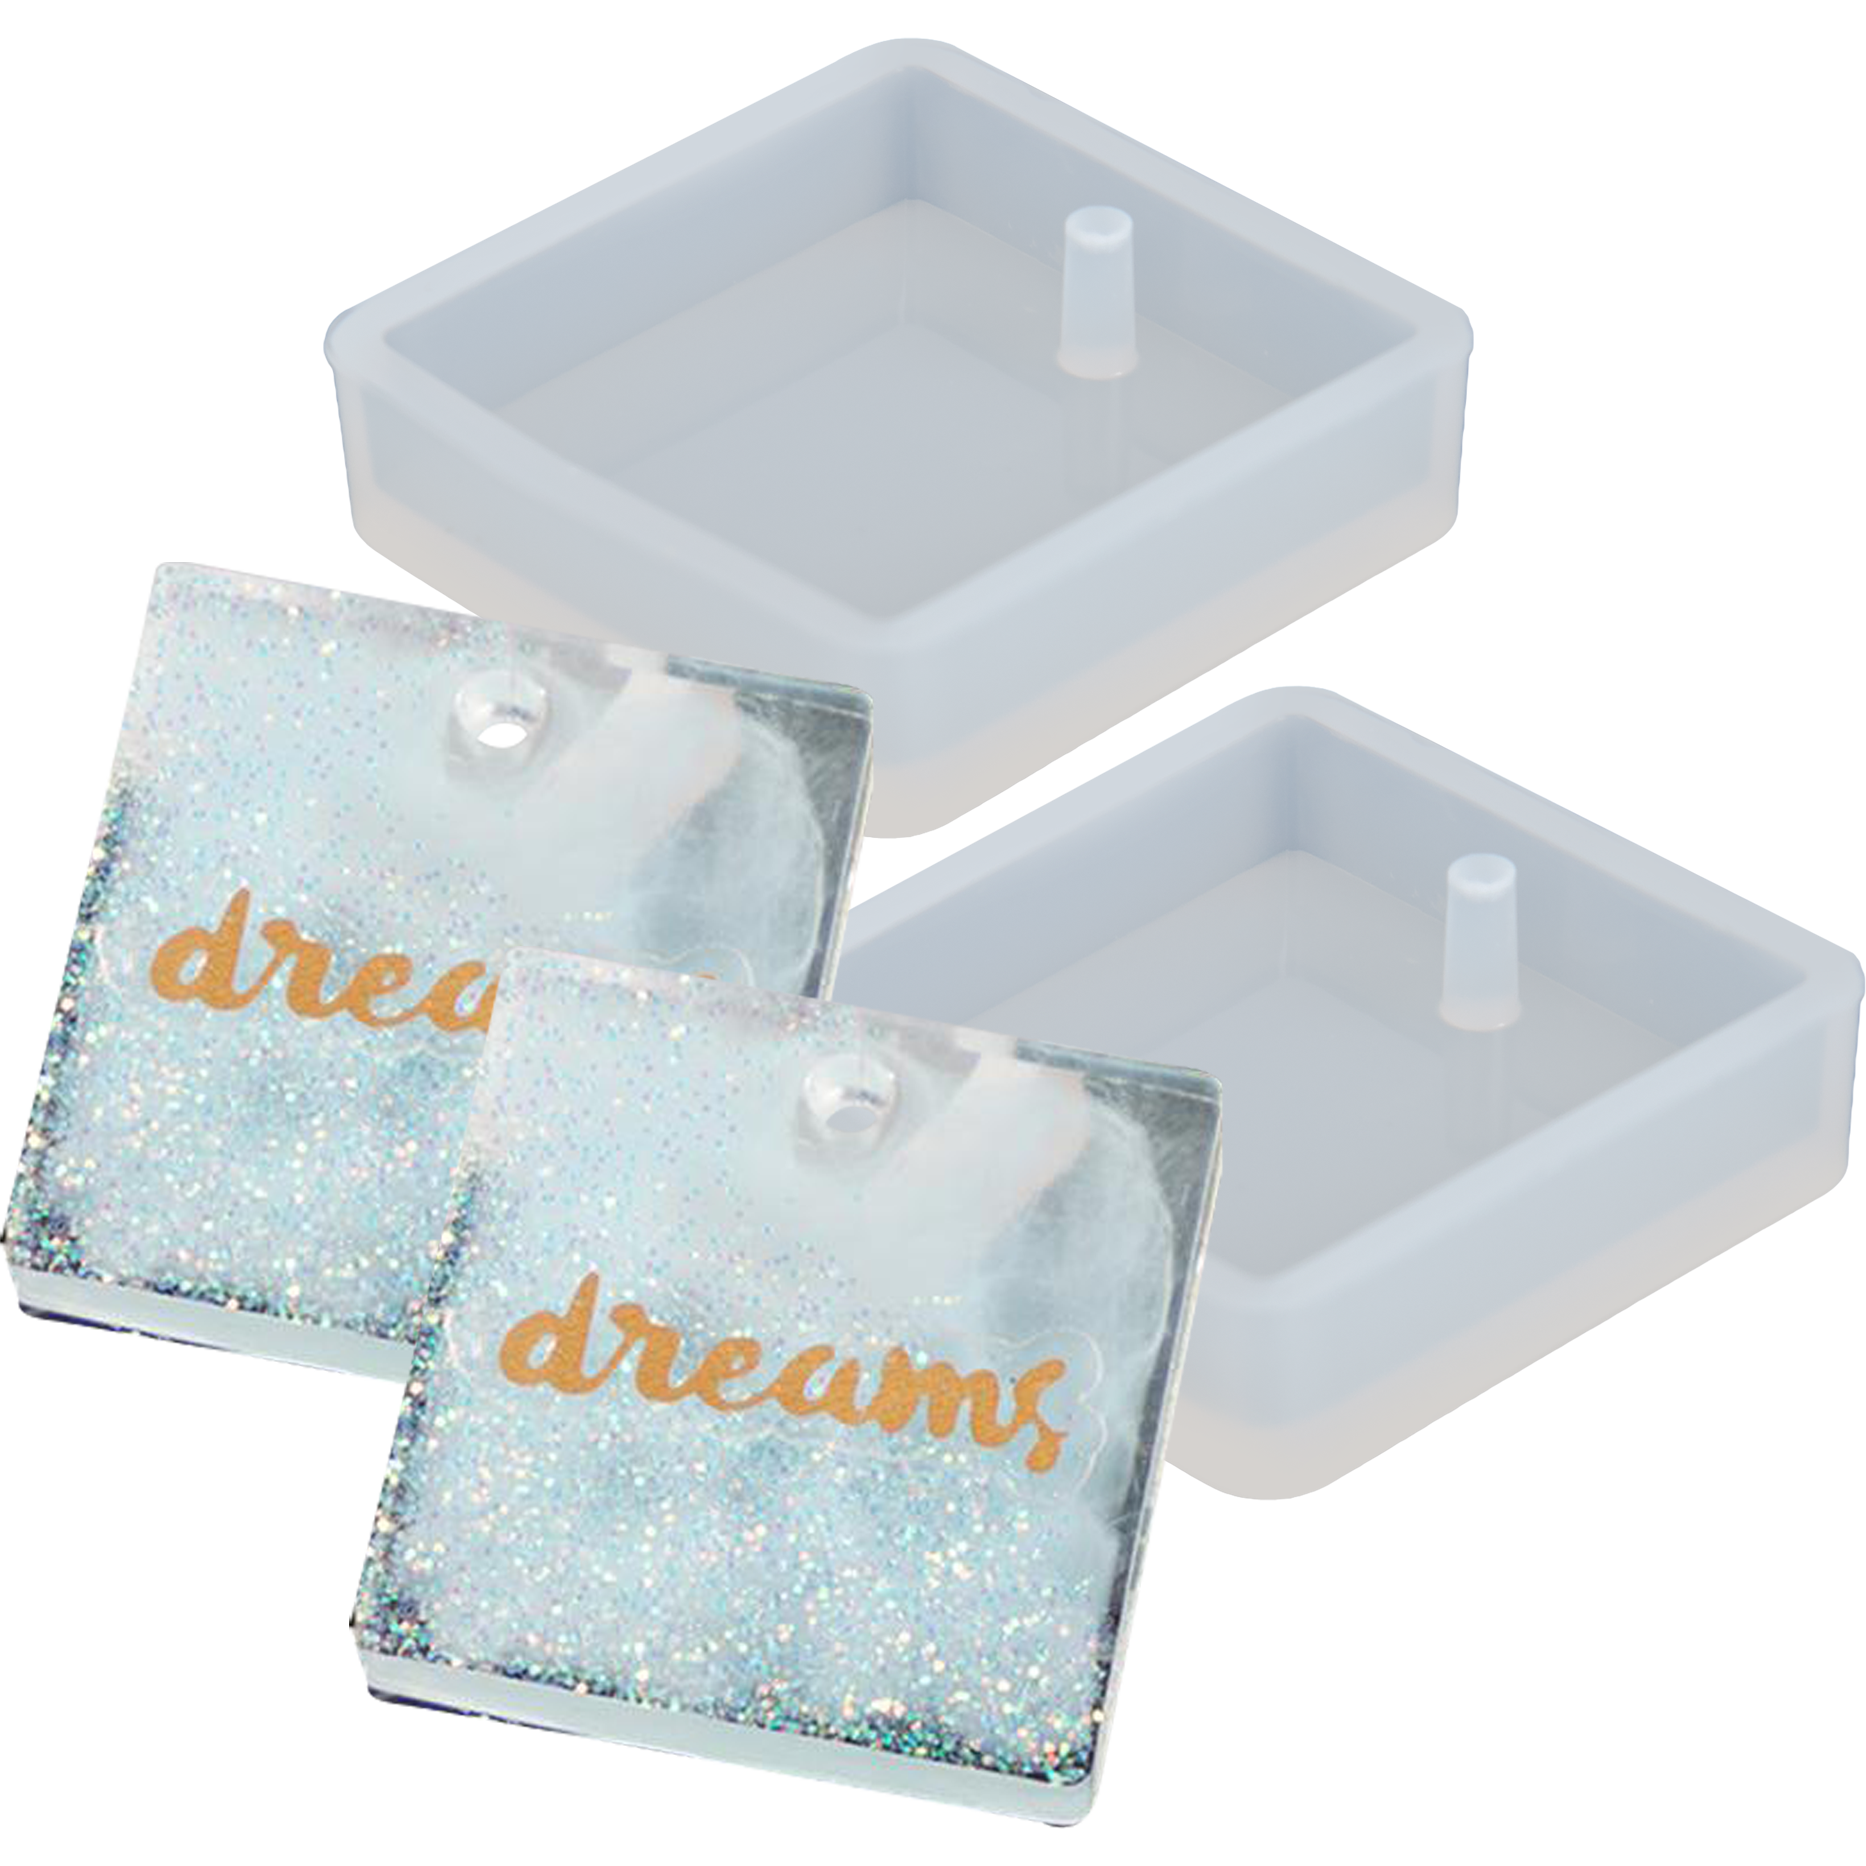 Image of Urban Crafter Silicone Jewellery Mould- Square Earring Moulds (Set of 2)